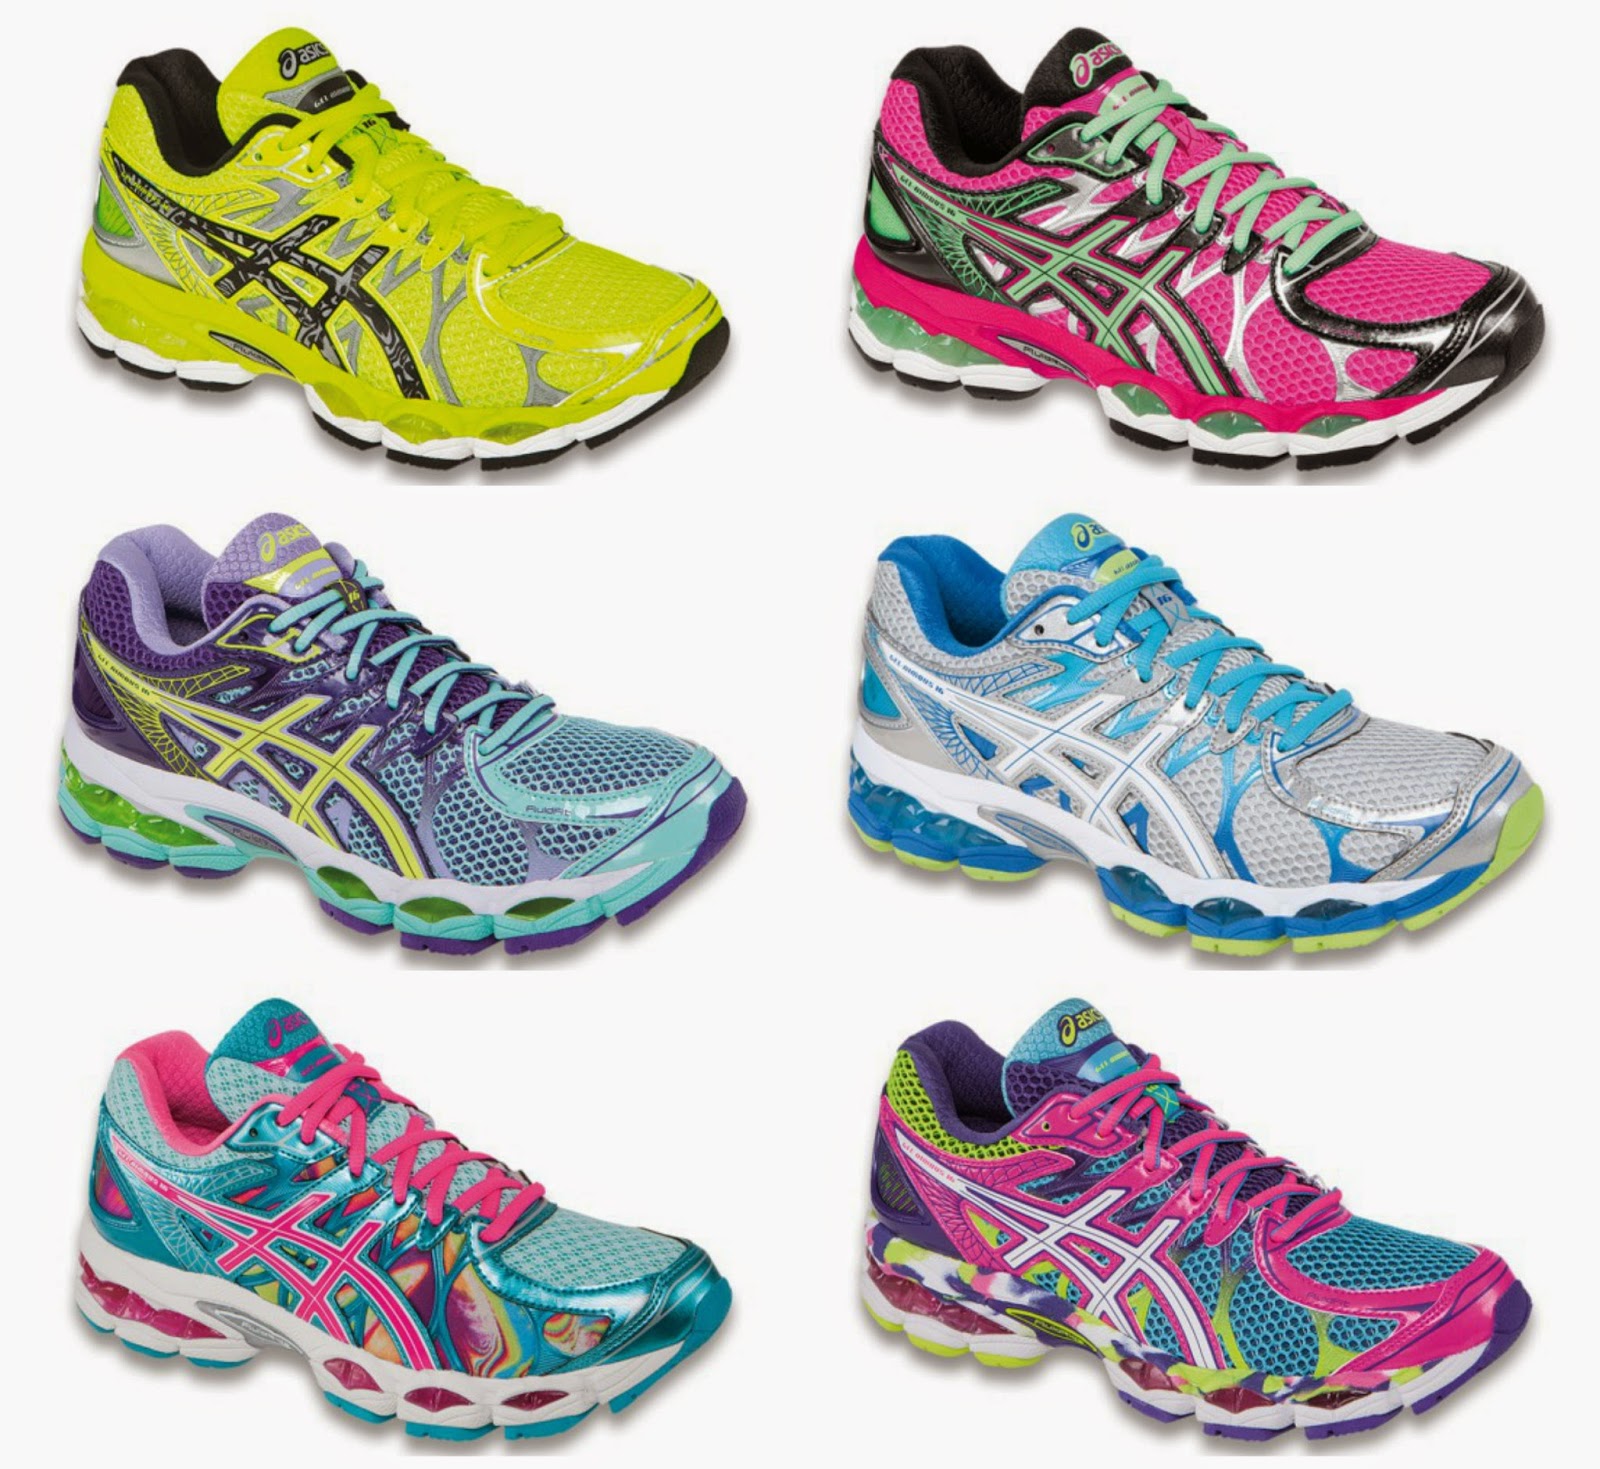 Conscious Queen multipurpose I Run For Wine: ASICS Gel Nimbus 16 #giveaway - 12 Days of Christmas Day 1